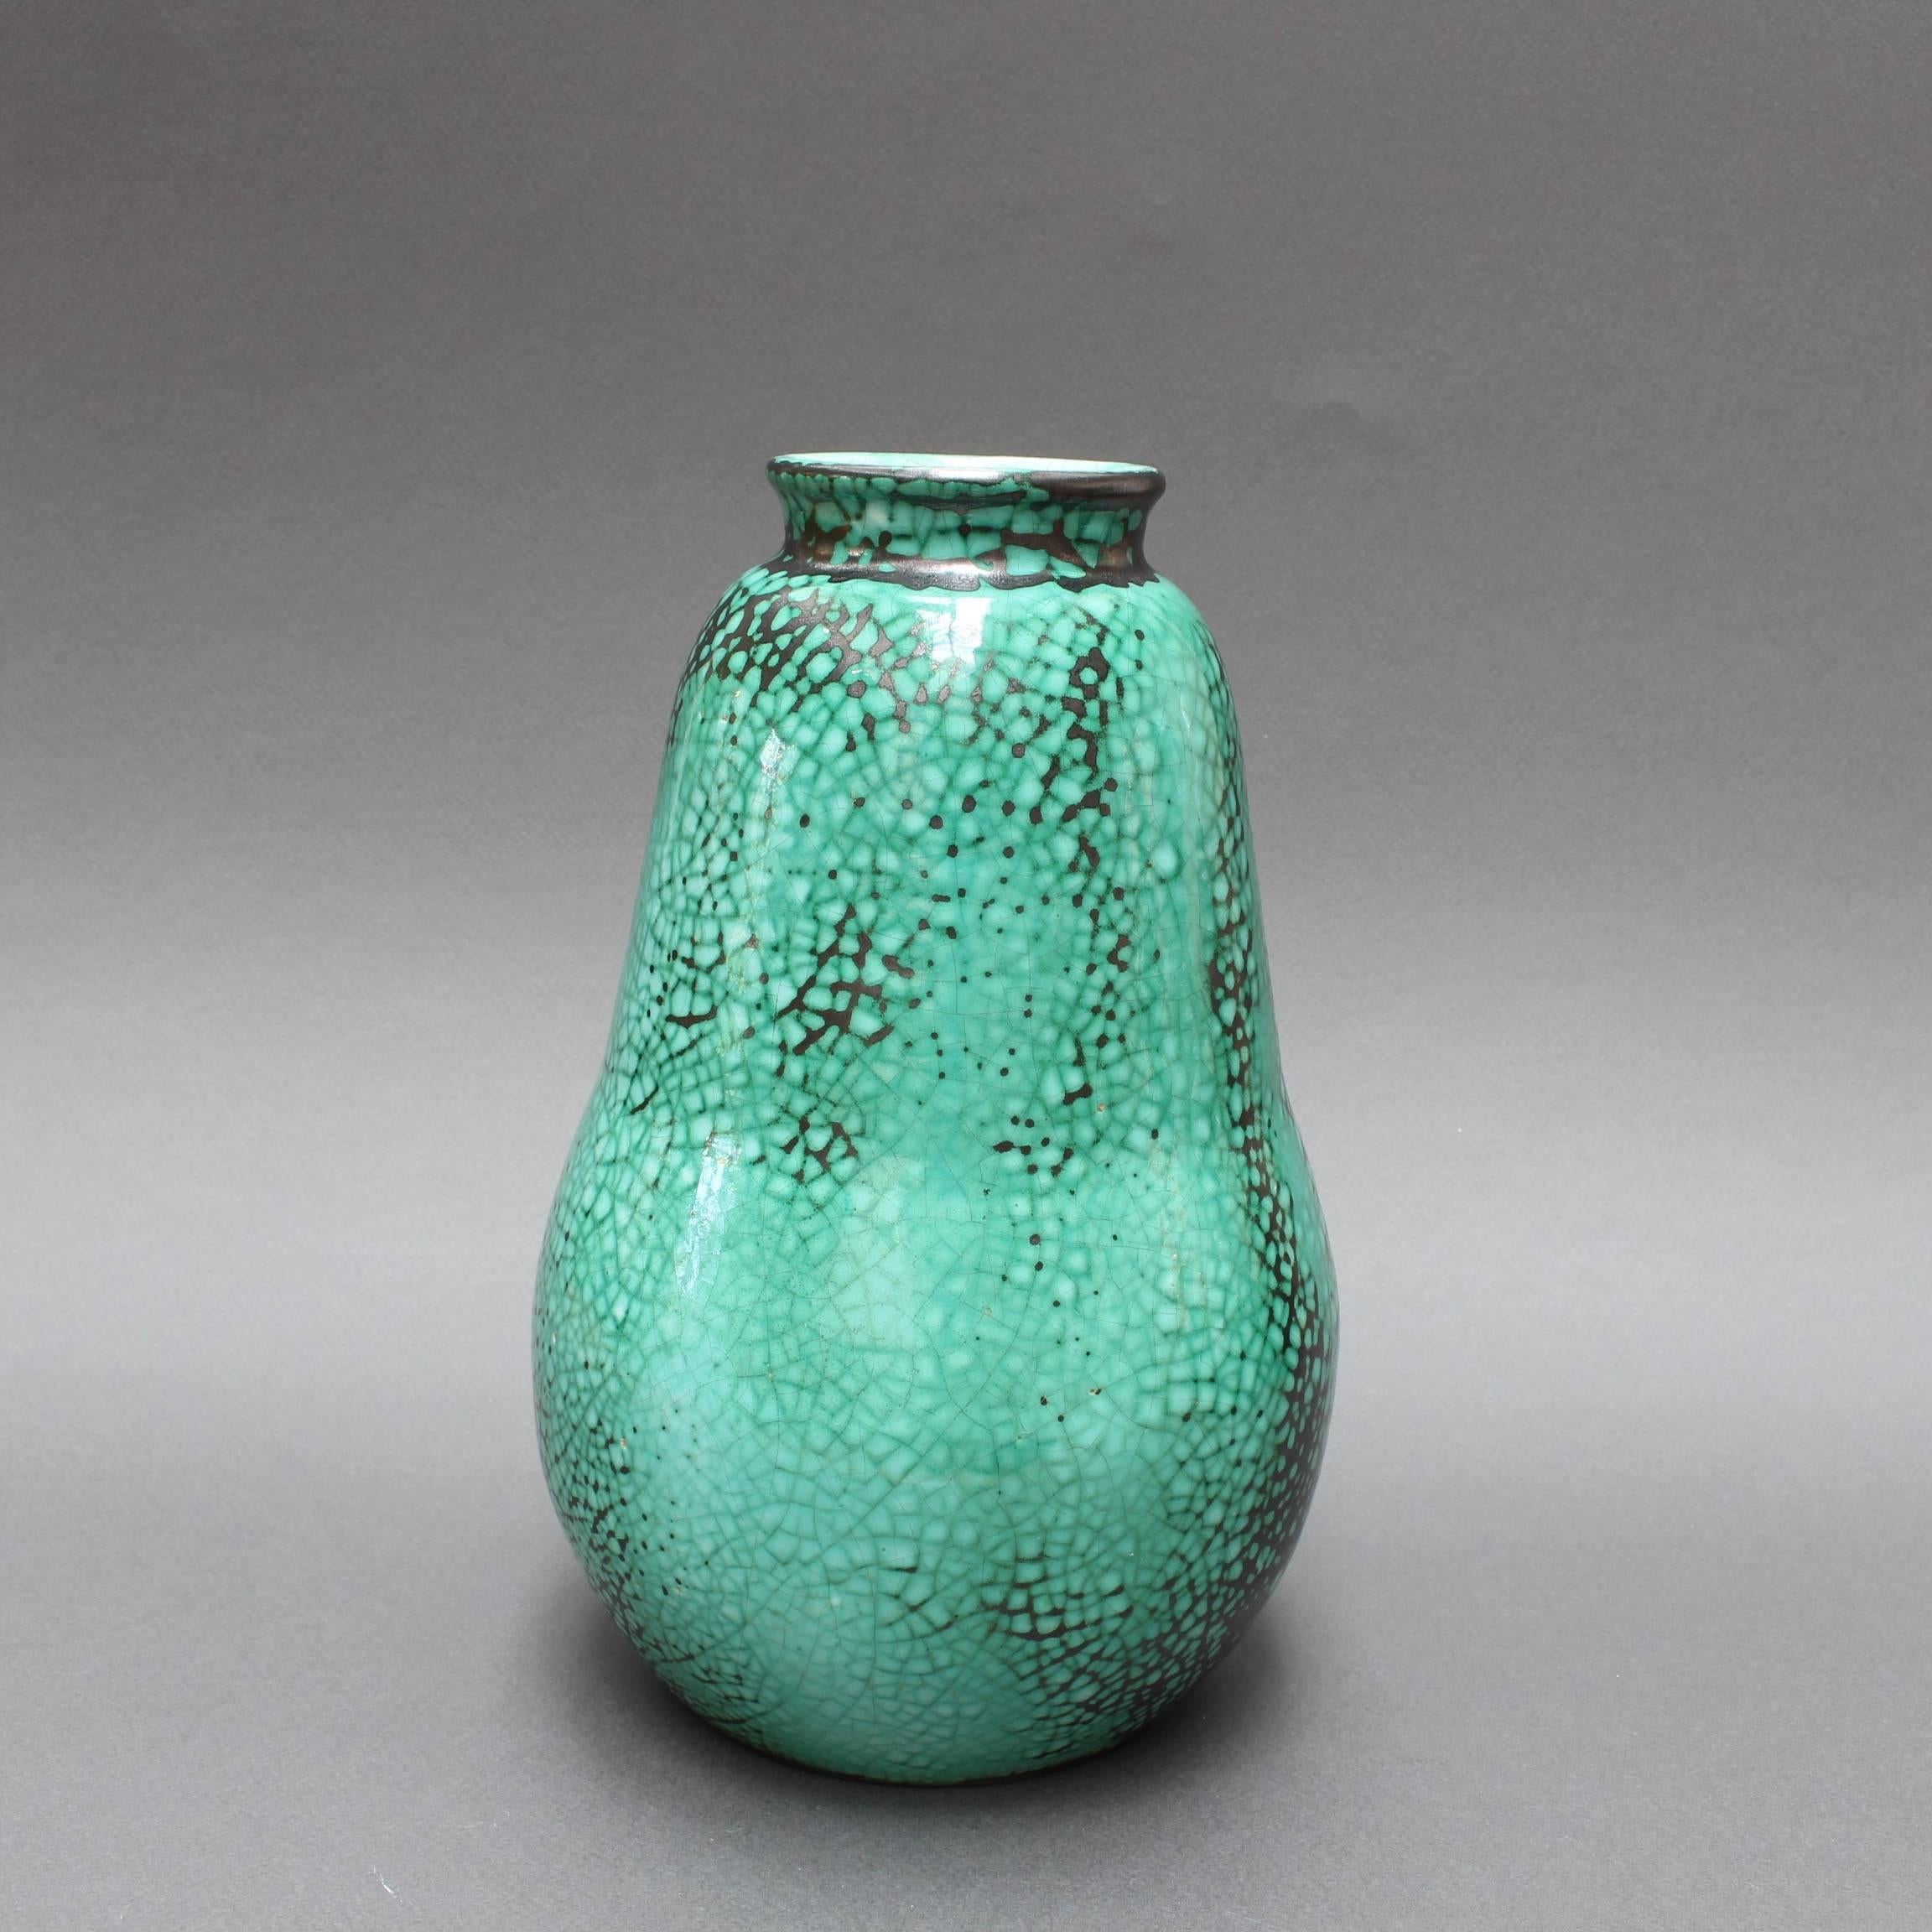 French Pear-Shaped Green and Black Ceramic Vase by Primavera, circa 1930s